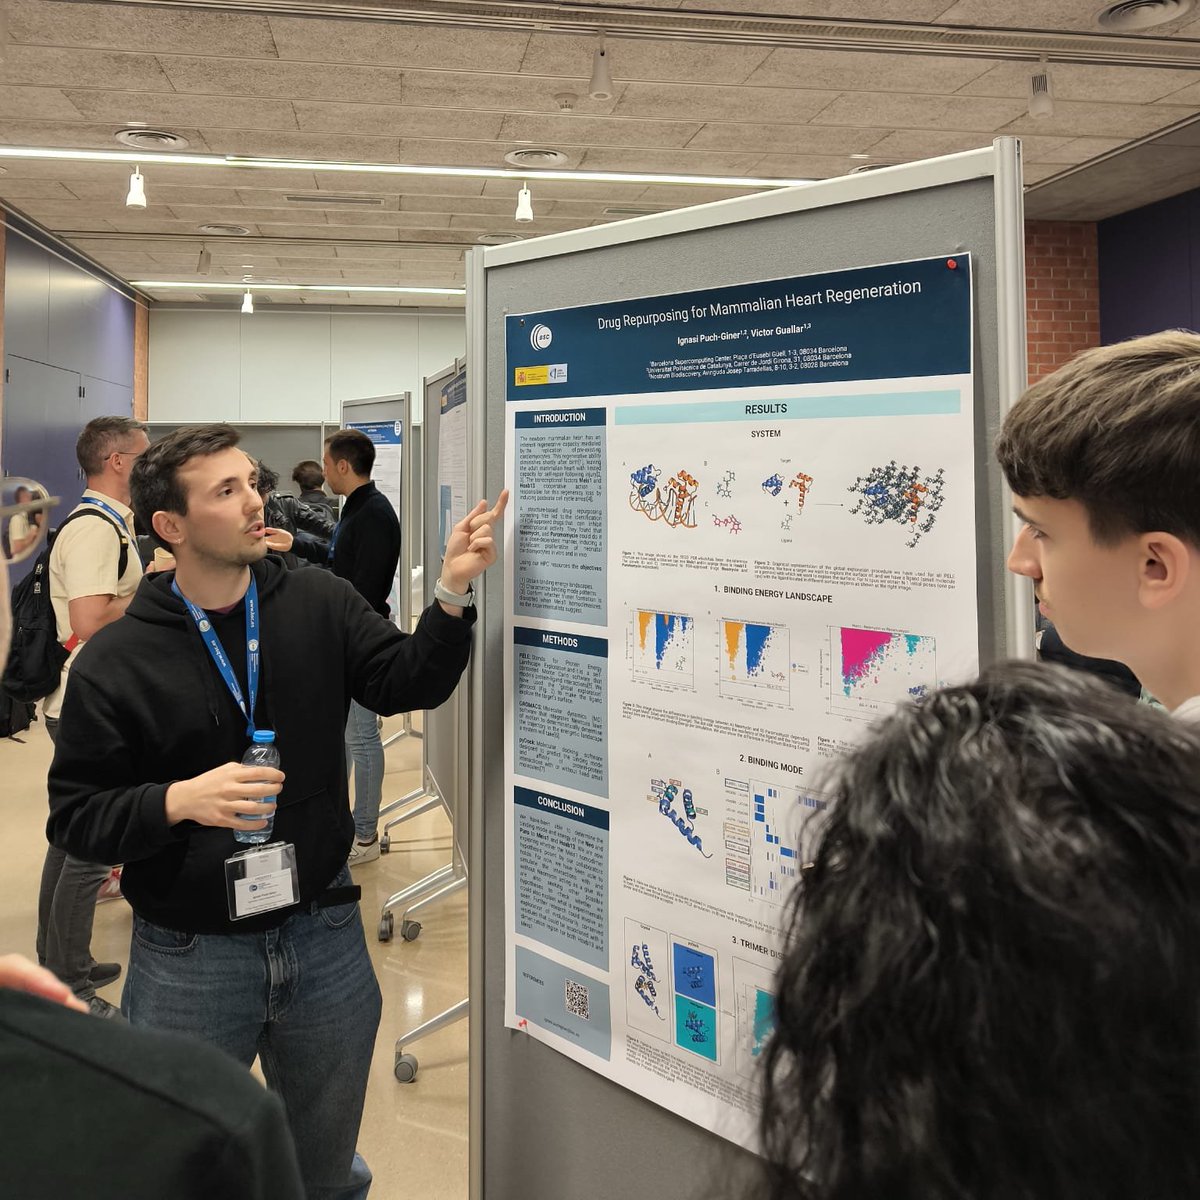 Our #PhD students have presented their work at this year's #DocSym at @BSC_CNS. Great talks by @RocFarriol and Miguel Luengo, and very insightful posters by Júlia Vilalta and @puch_giner🧑‍🏫. Thank you to all the organizers and participants for this enriching event👏.